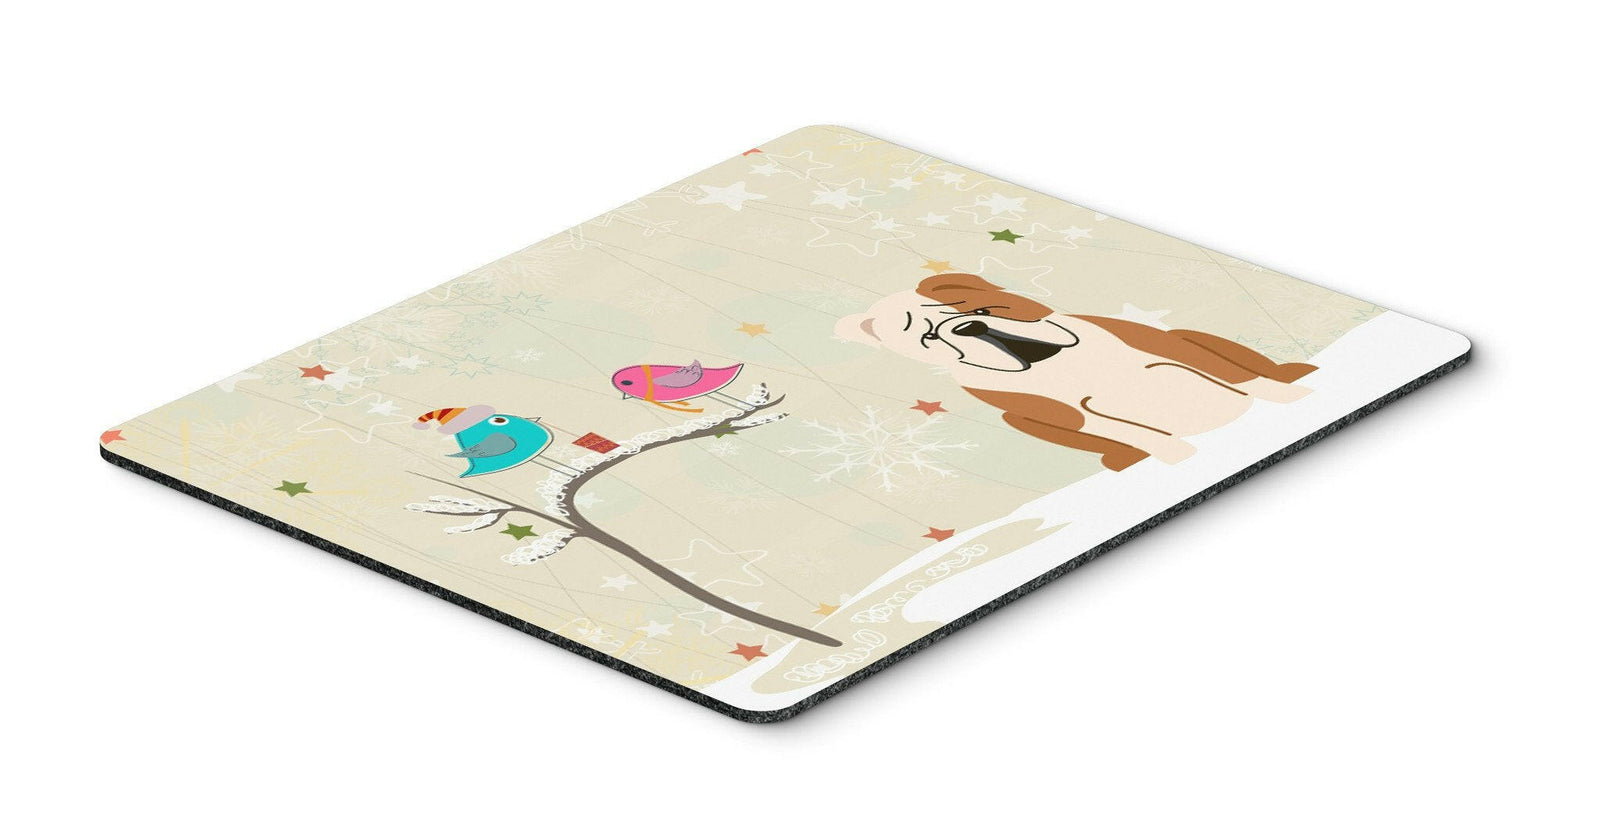 Christmas Presents between Friends English Bulldog Fawn White Mouse Pad, Hot Pad or Trivet BB2597MP by Caroline's Treasures